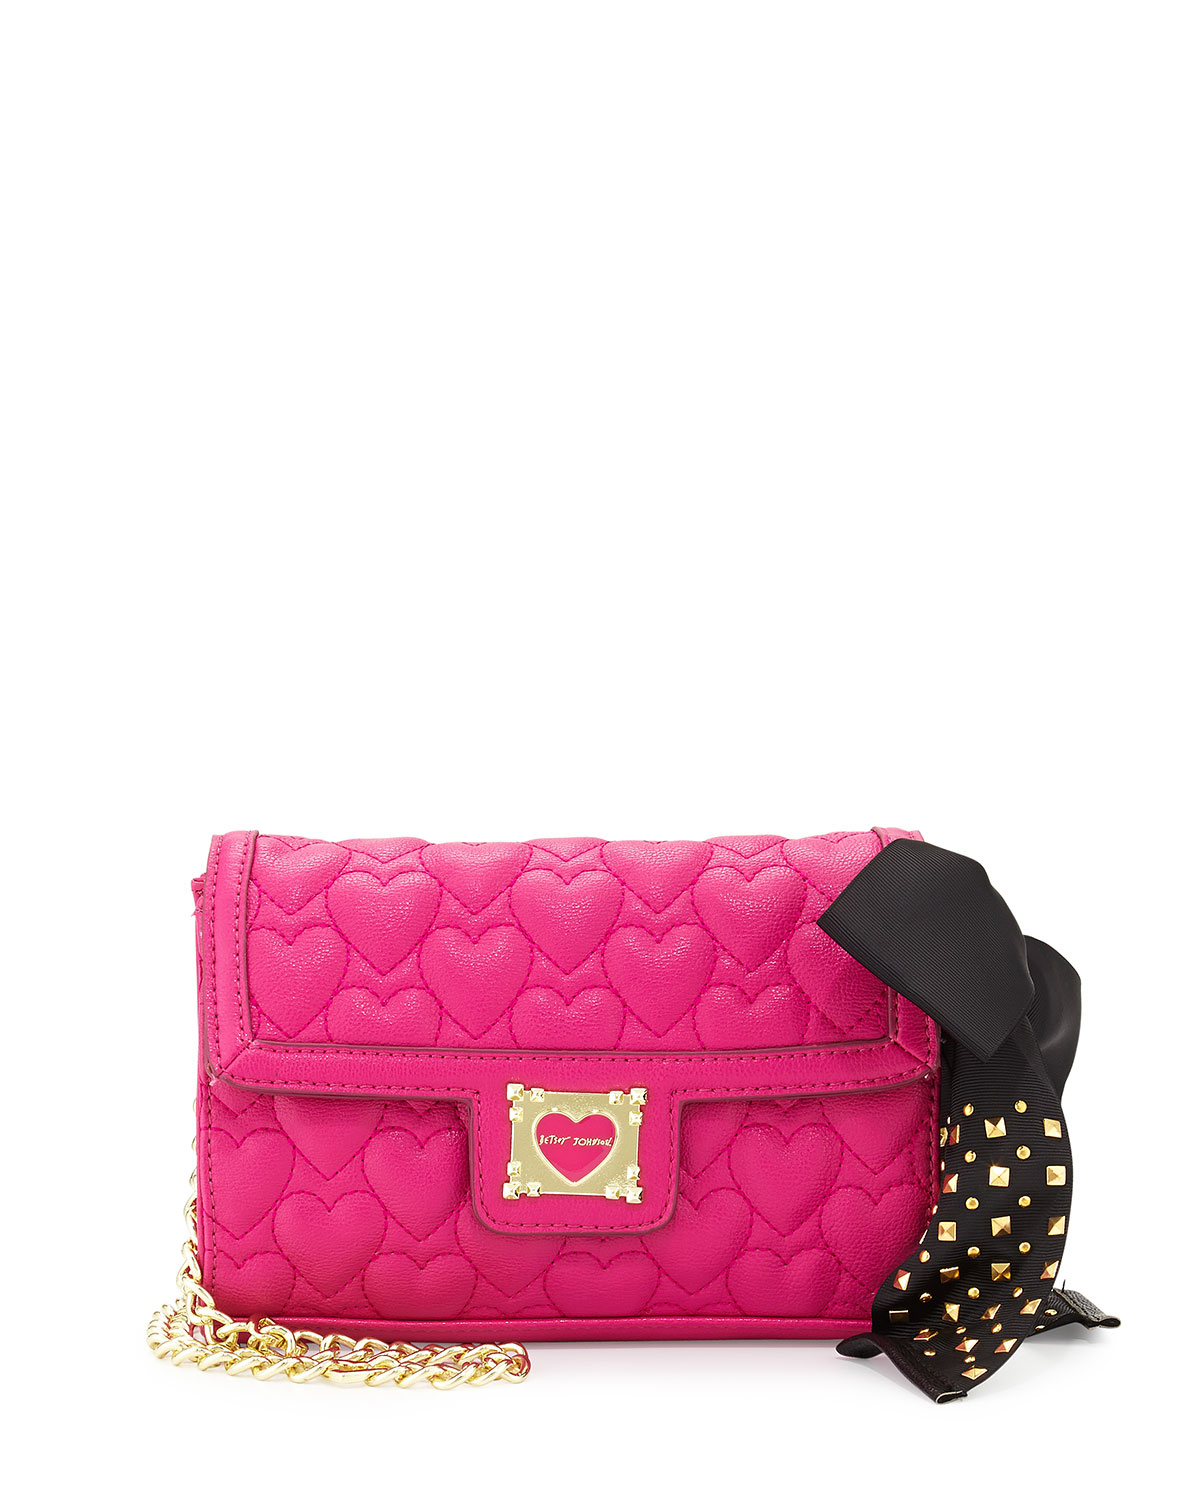 Betsey johnson Heart-Quilted Crossbody Bag in Pink | Lyst